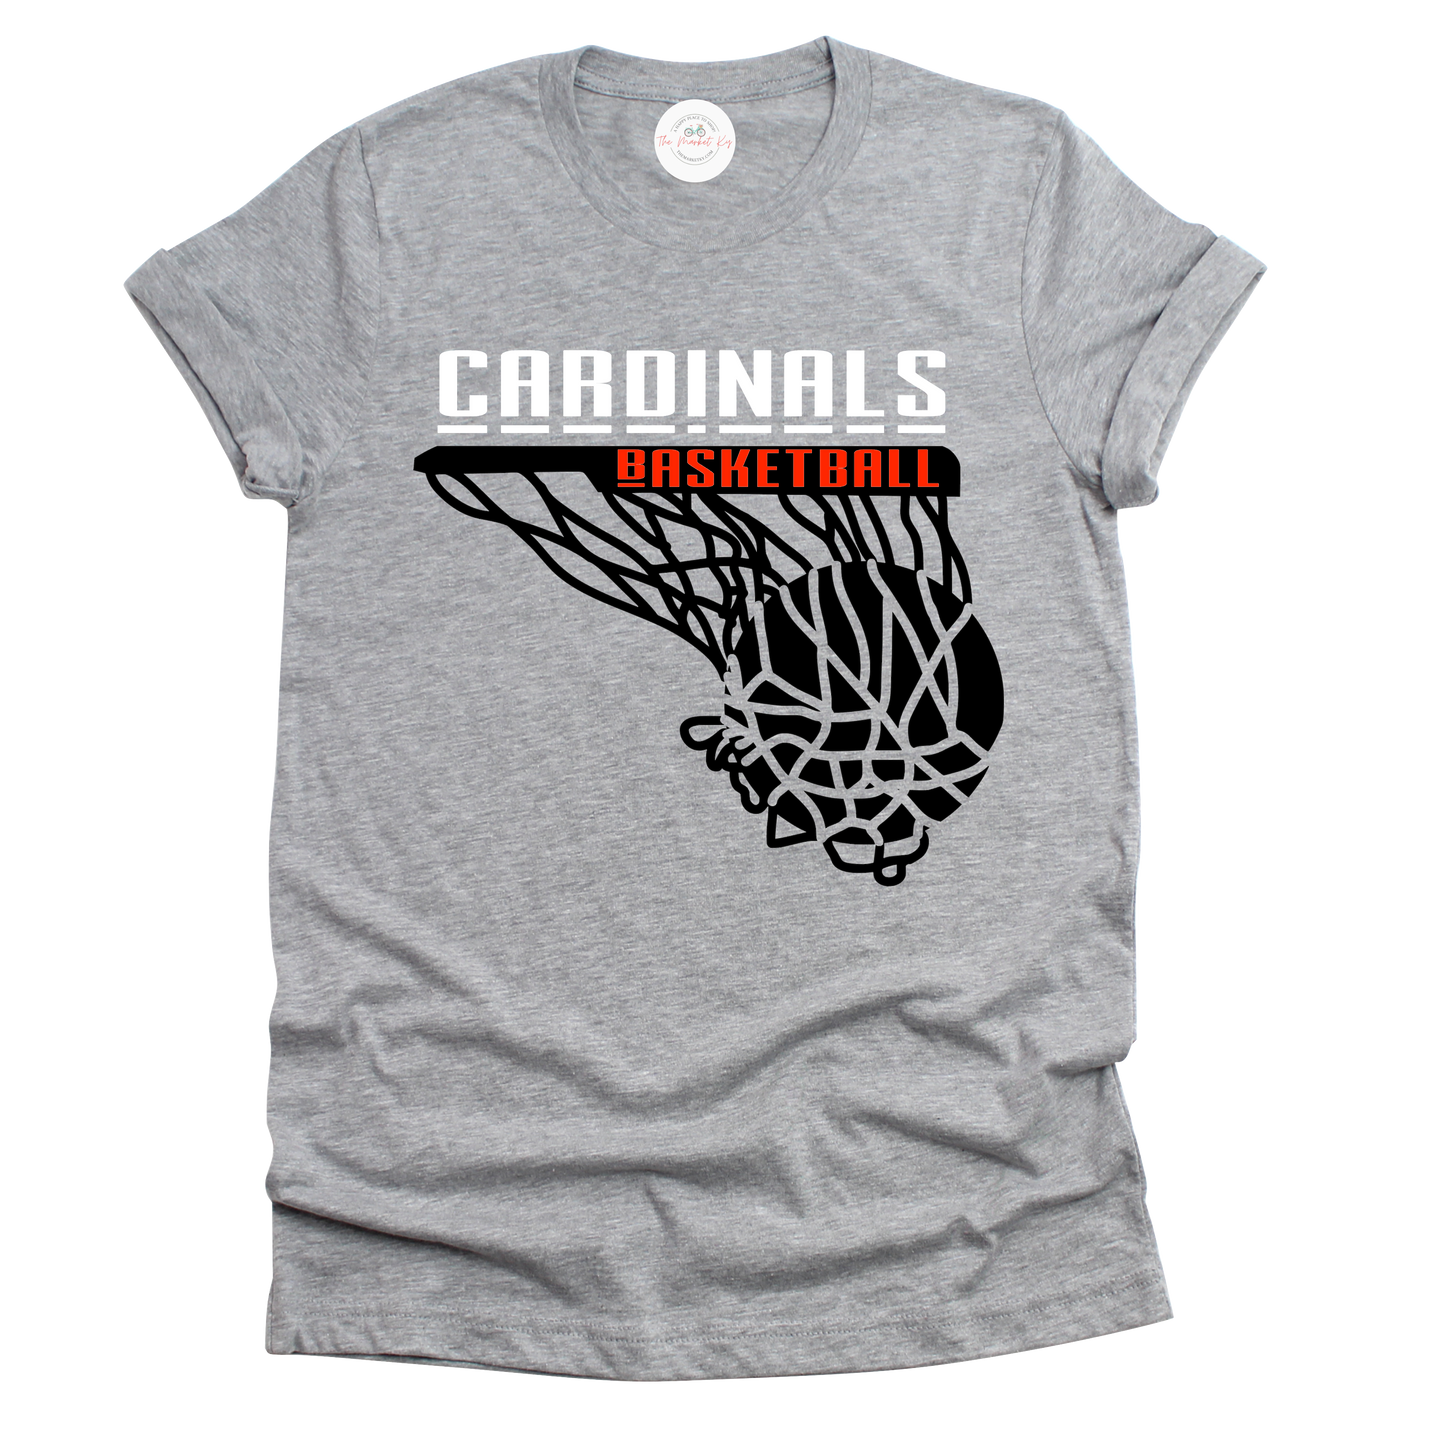 Nothing But Net-Cardinals